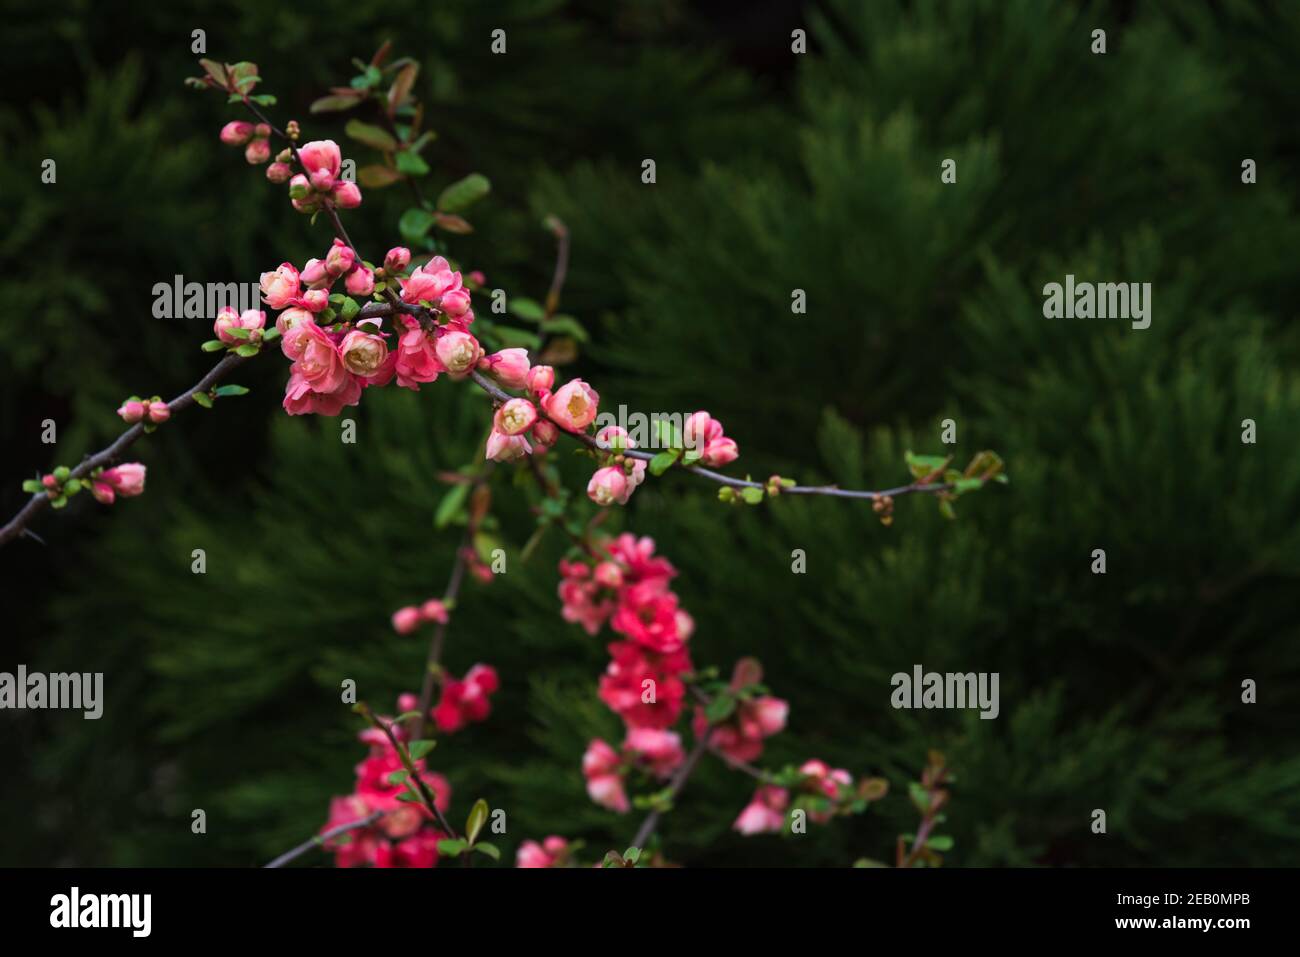 Japanese quince (Chaenomeles) bush blossoming with red flowers. Nature background. Gardening concept Stock Photo